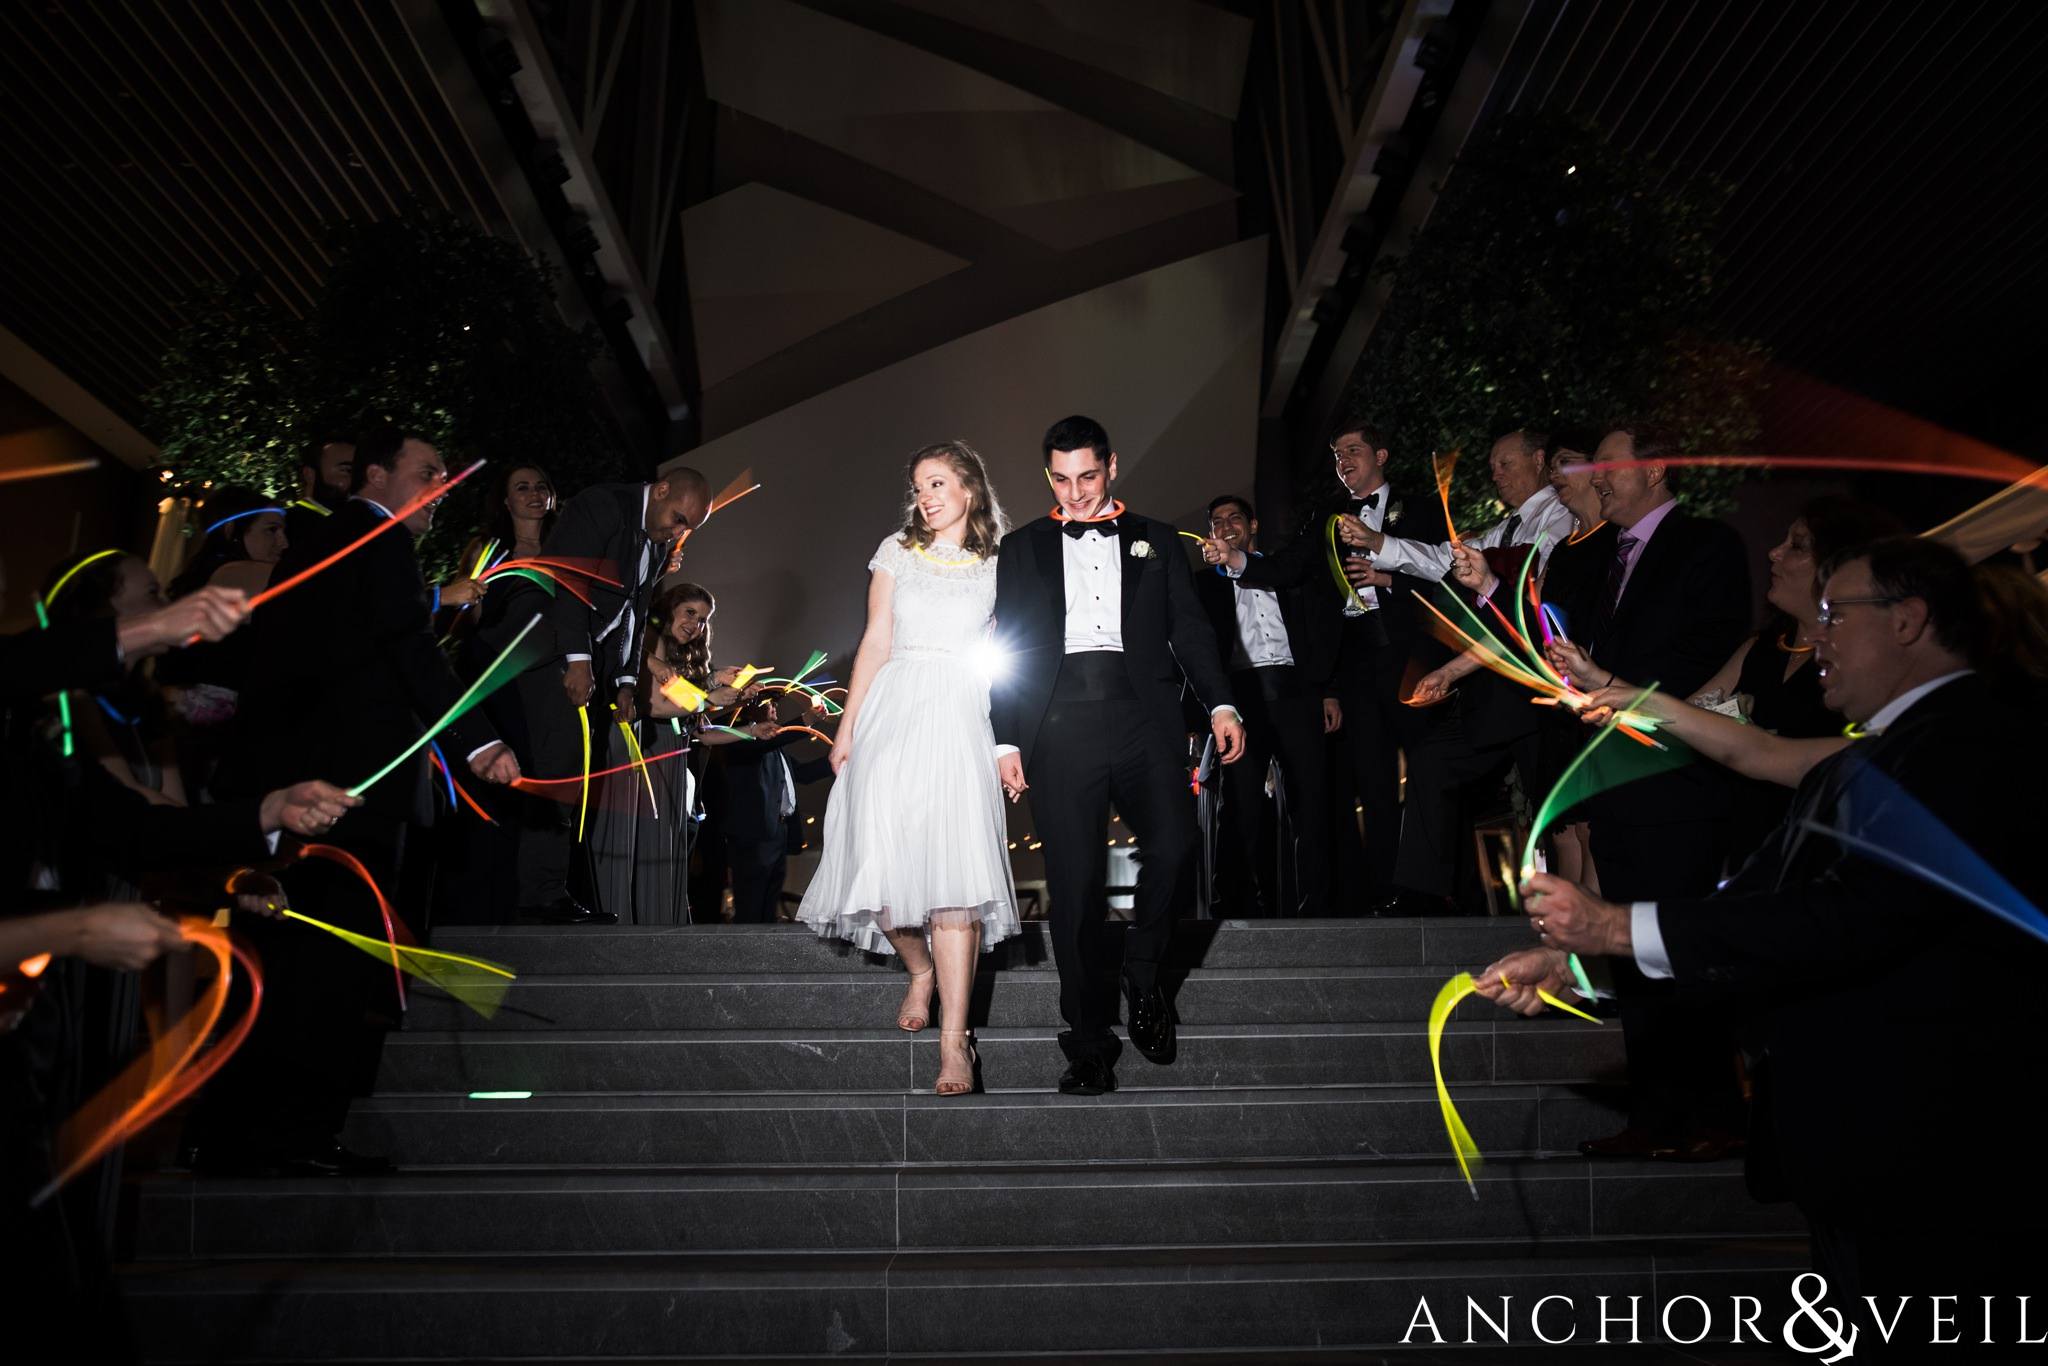 grand exit during their ritz Carlton wedding in Uptown Charlotte NC